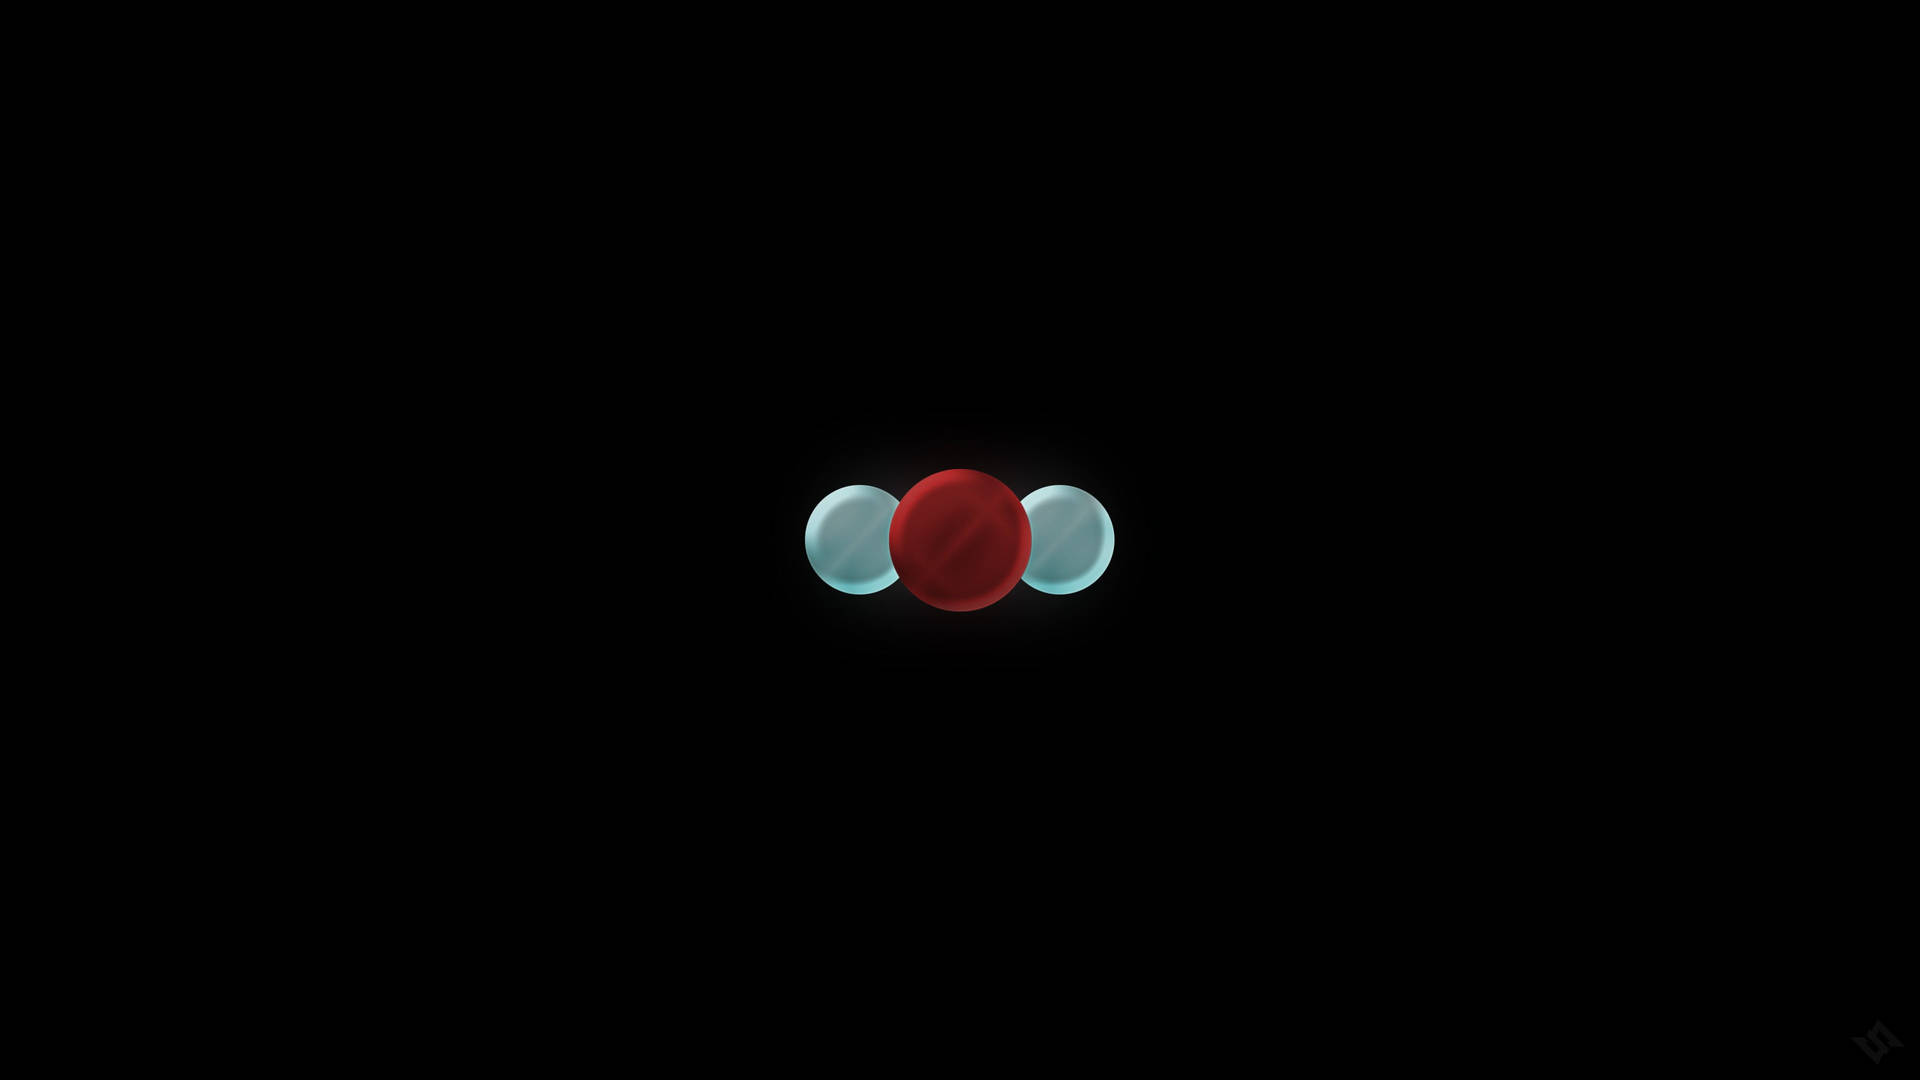 Amoled Red And White Circles 4k Background